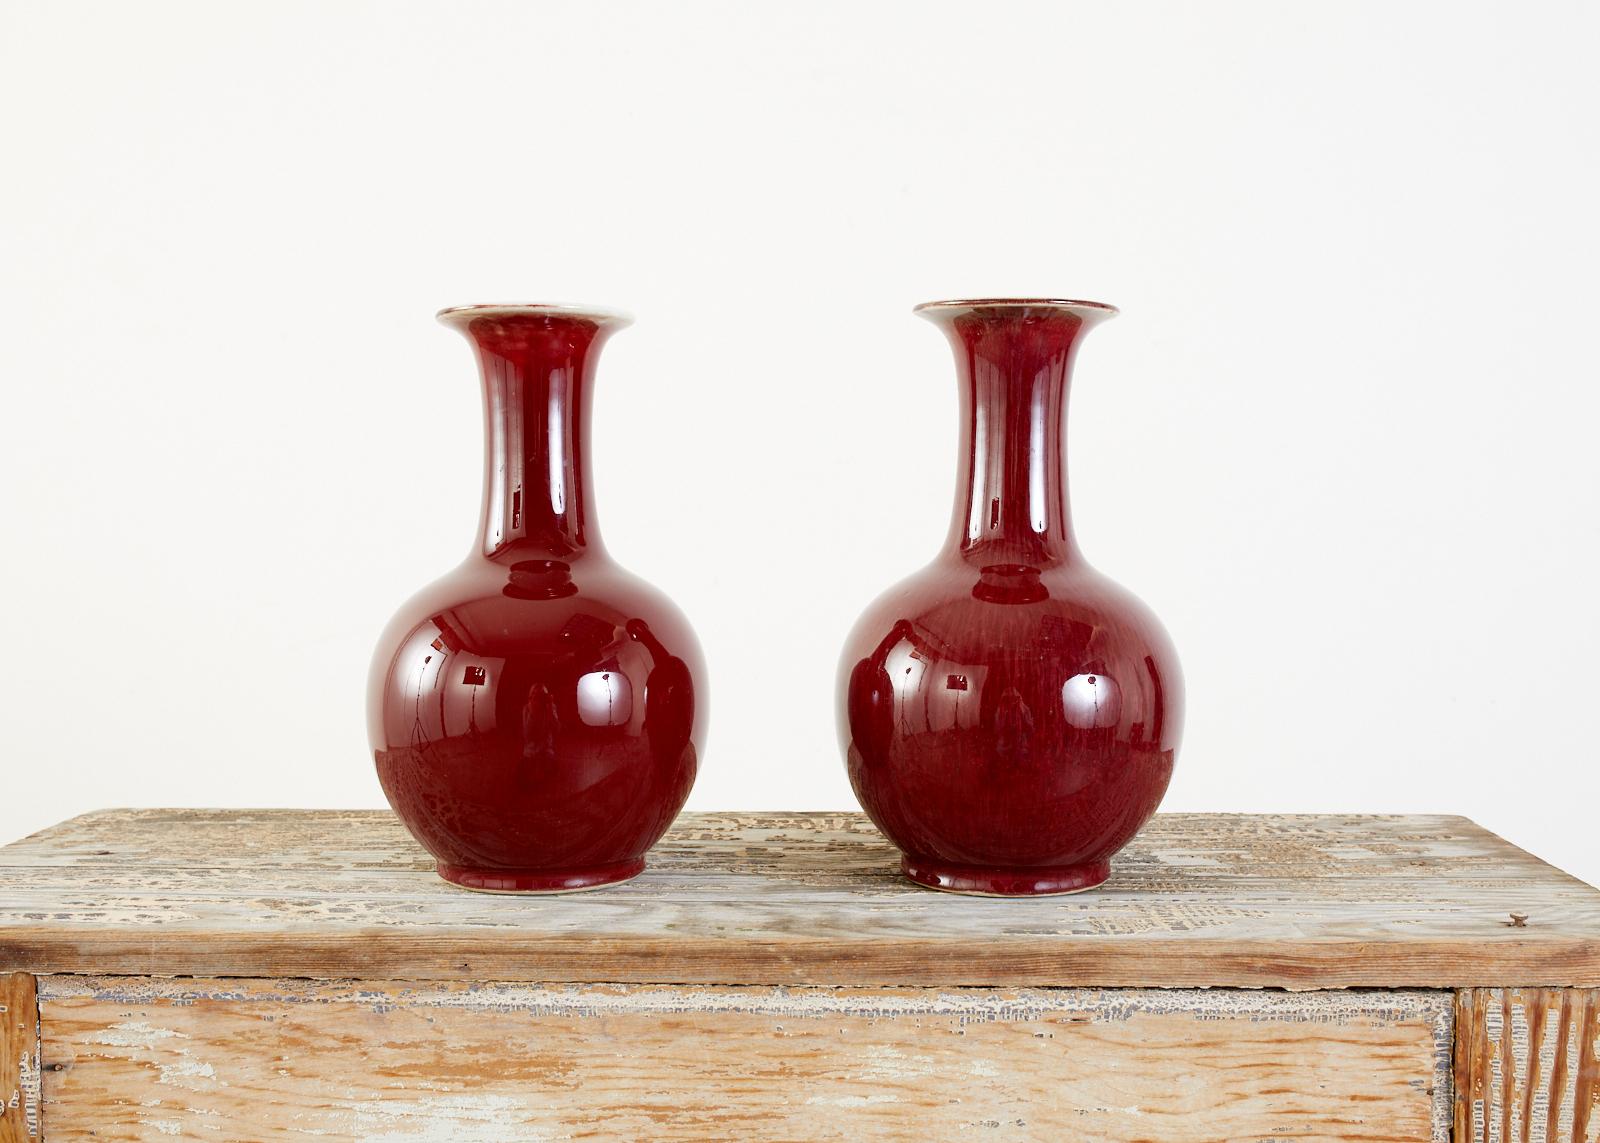 Distinctive pair of Chinese export vases featuring a deep oxblood Sang de Boeuf color on the Langyao glaze. The vases have a long waisted neck and globular belly. Made in the Jingdezhen kilns the vases have a very fine craquelure on the finish. One